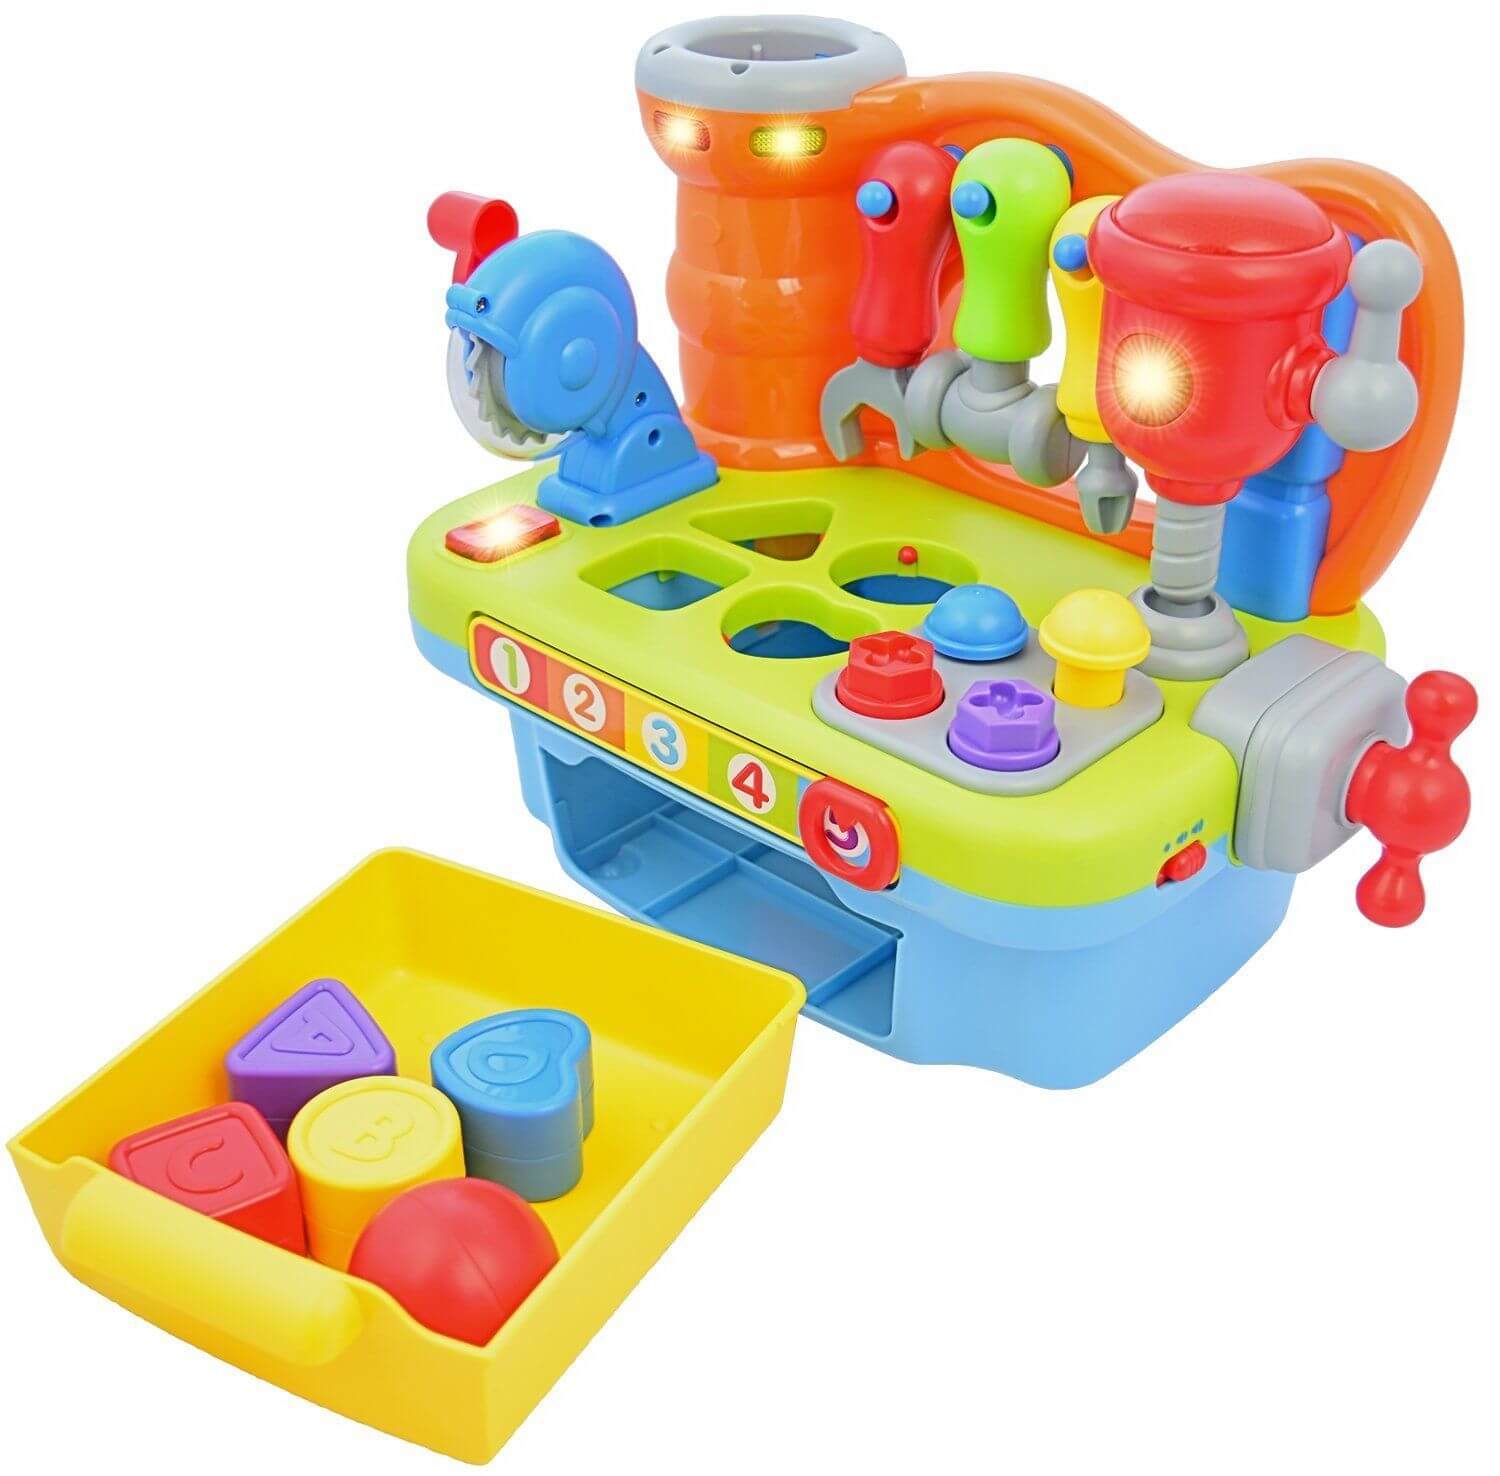 Toy Workshop Playset for Kids